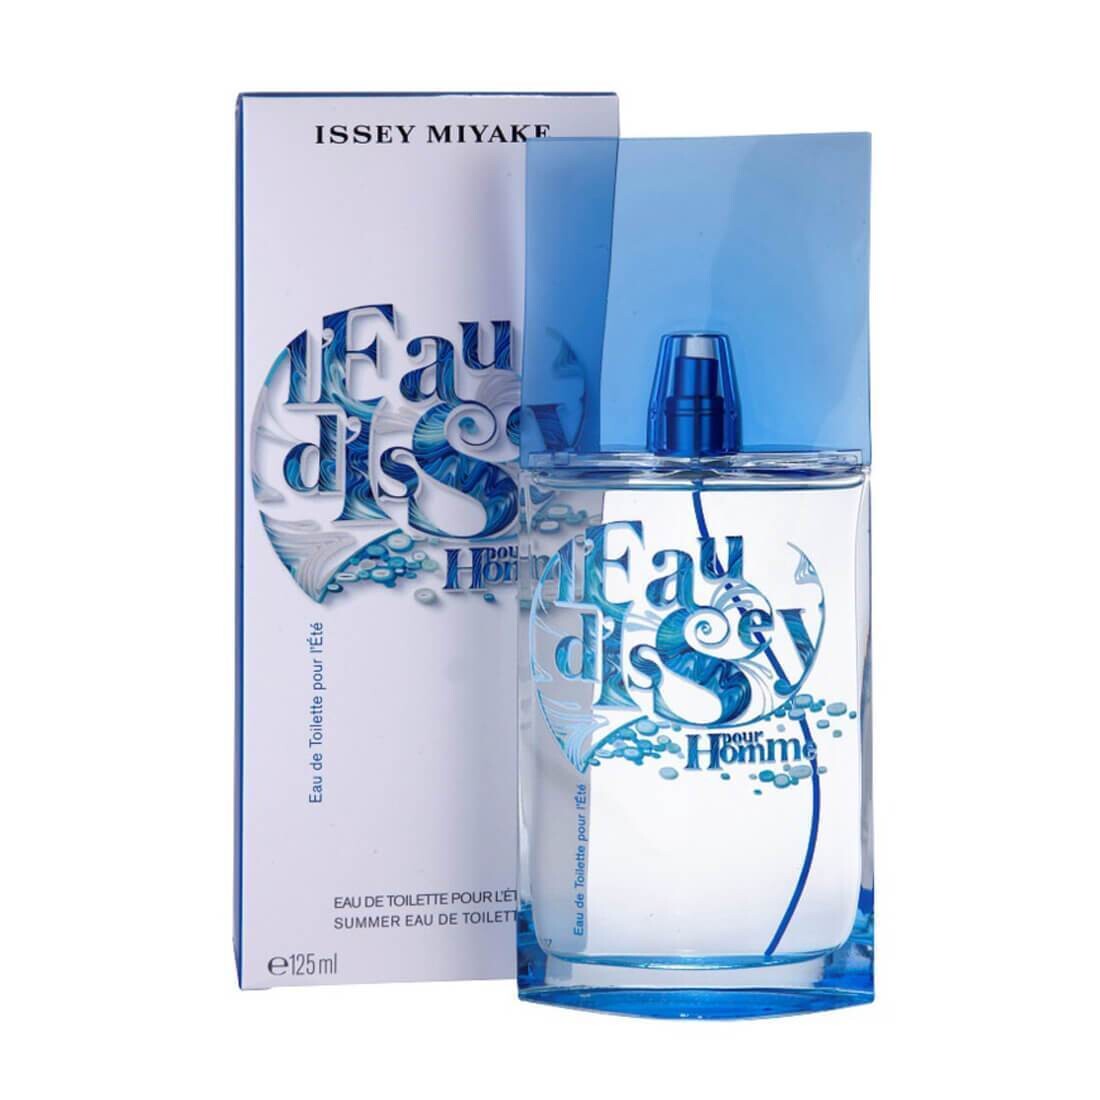 Issey Miyake Summer 2015 Pour L’ete EDT Perfume For Men – 125ml